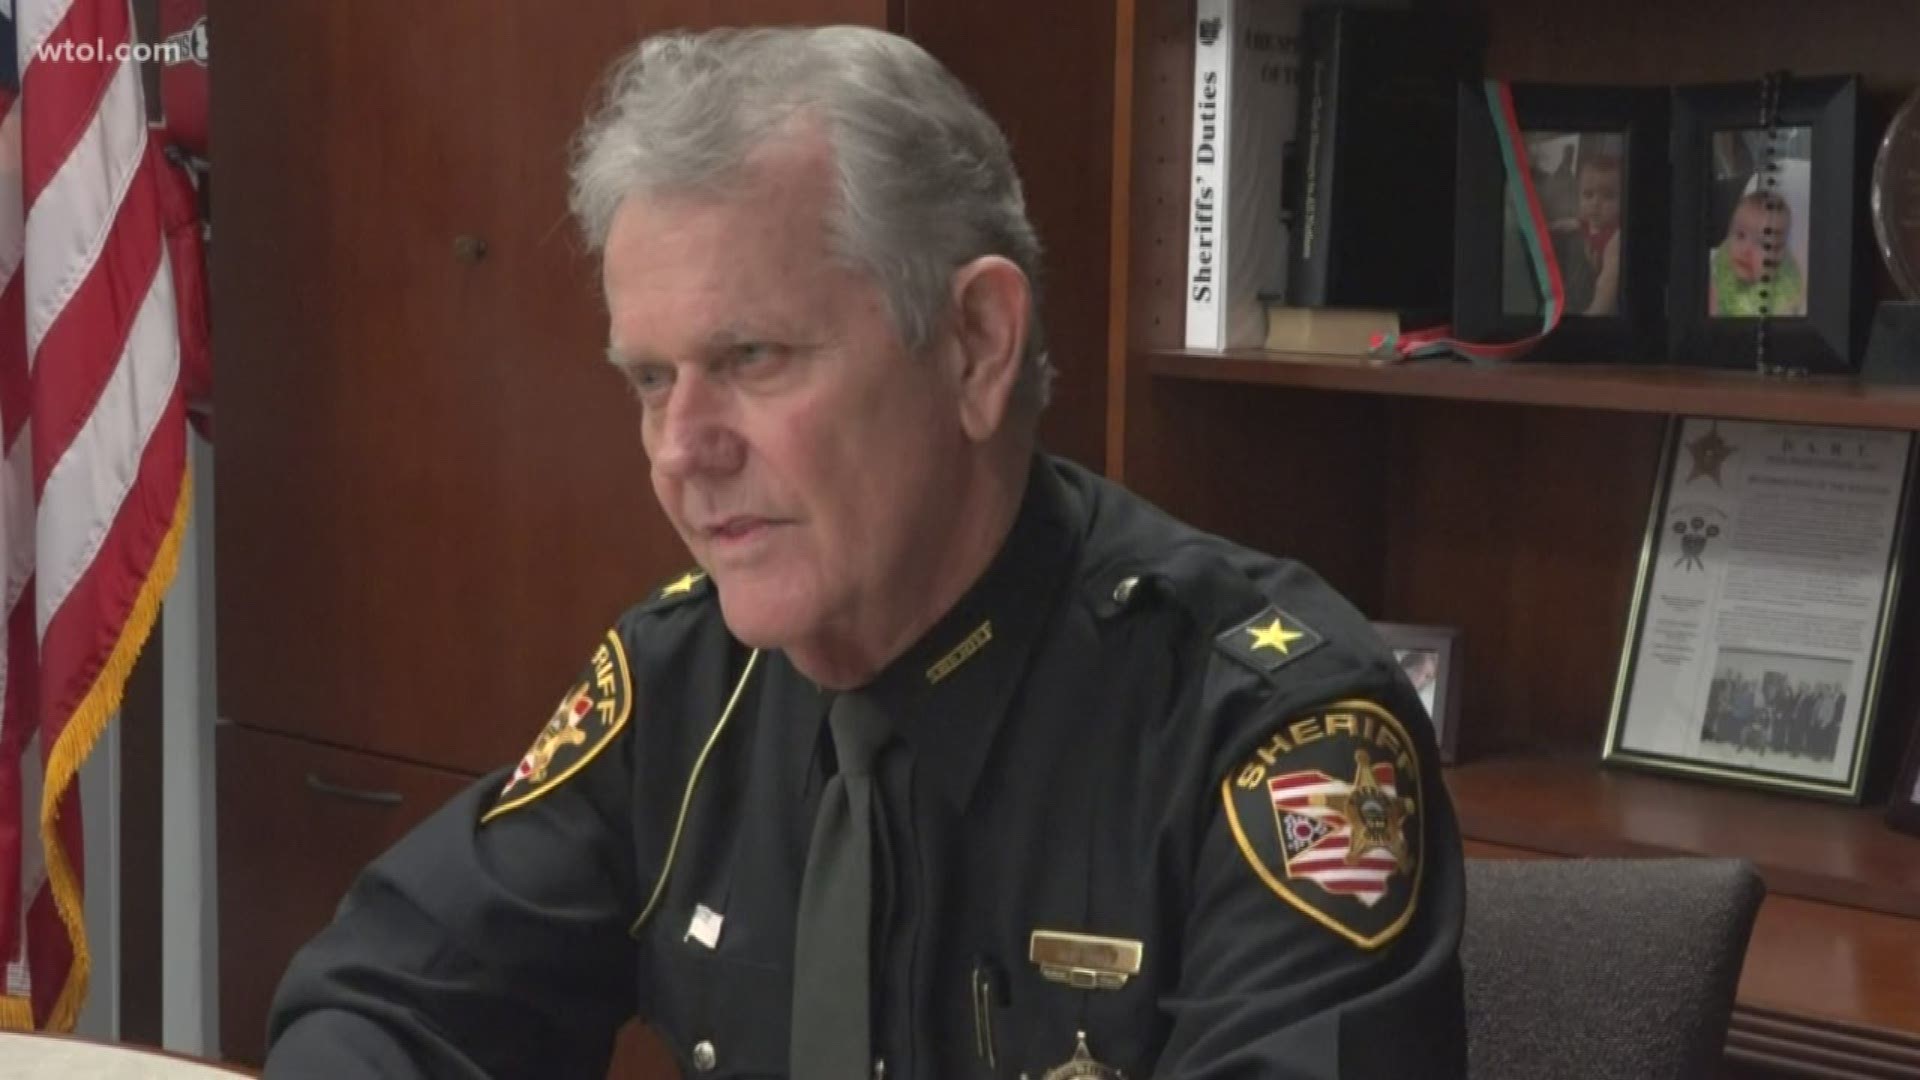 After 50 years of public service and two terms as the Lucas County Sheriff, John Tharp opens up about what he has planned for his final year in office.